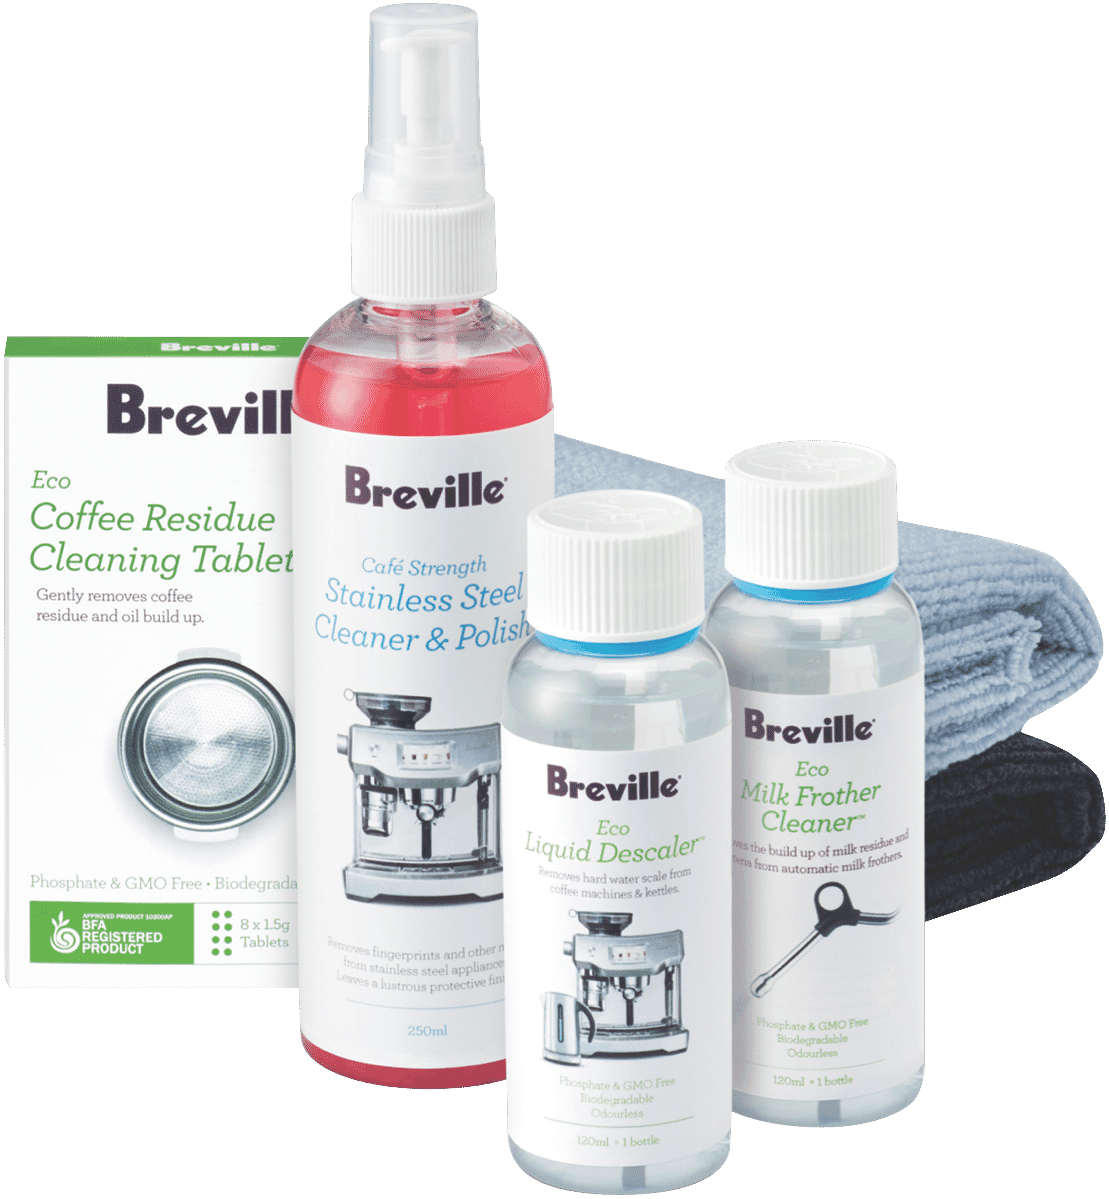 Breville BES015CLR0NAN1 Coffee Accessory Cleaning Pack at The Good Guys